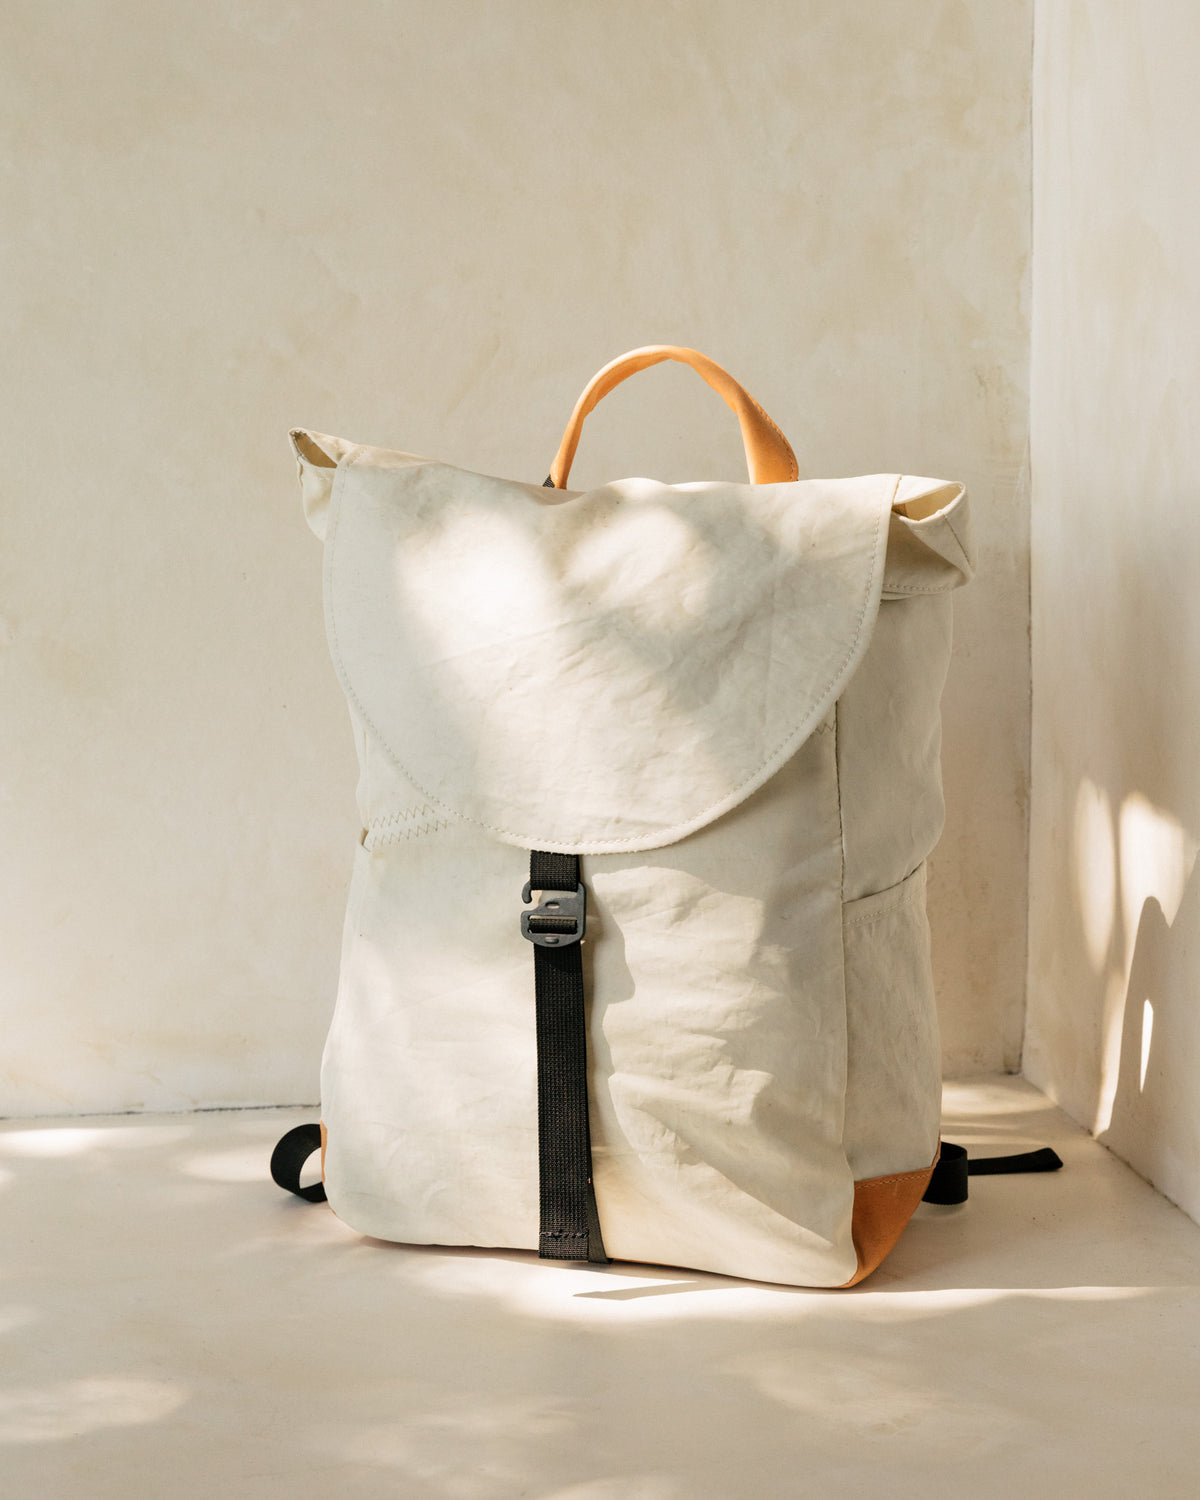 Stone Backpack V2 in Upcycled Sailcloth